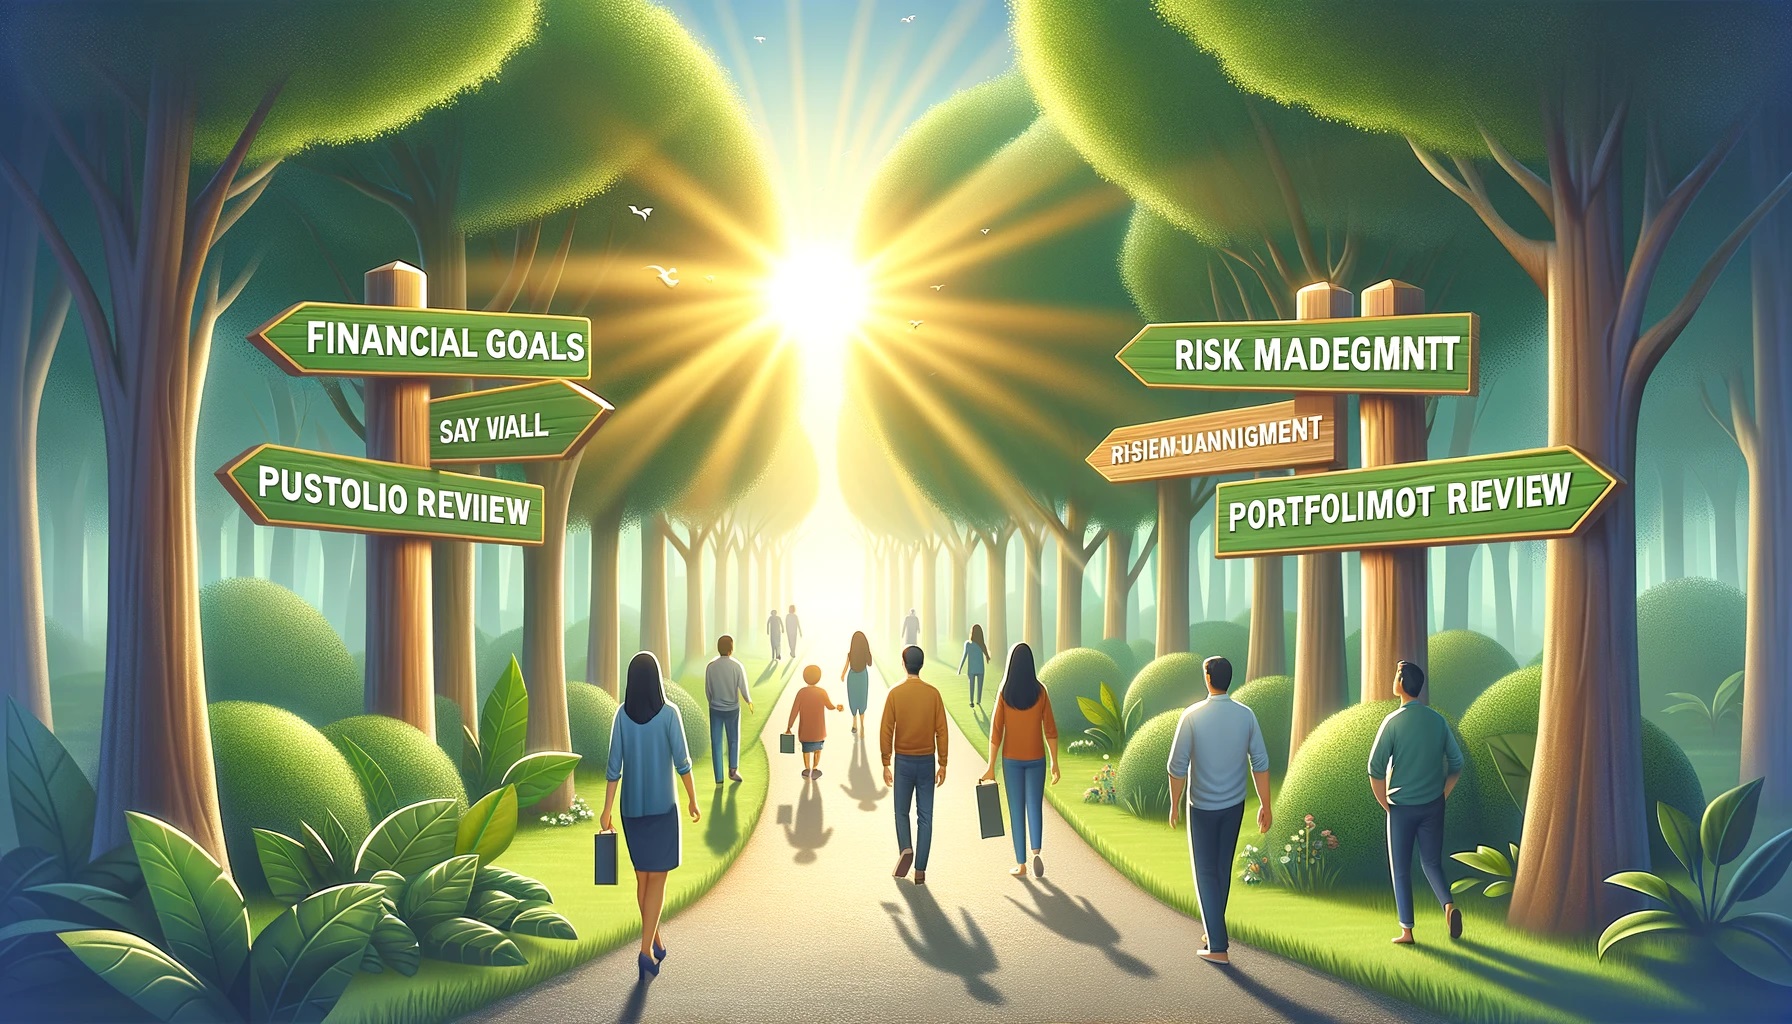 People of various ages following a path with signposts representing steps in a wealth strategy journey.